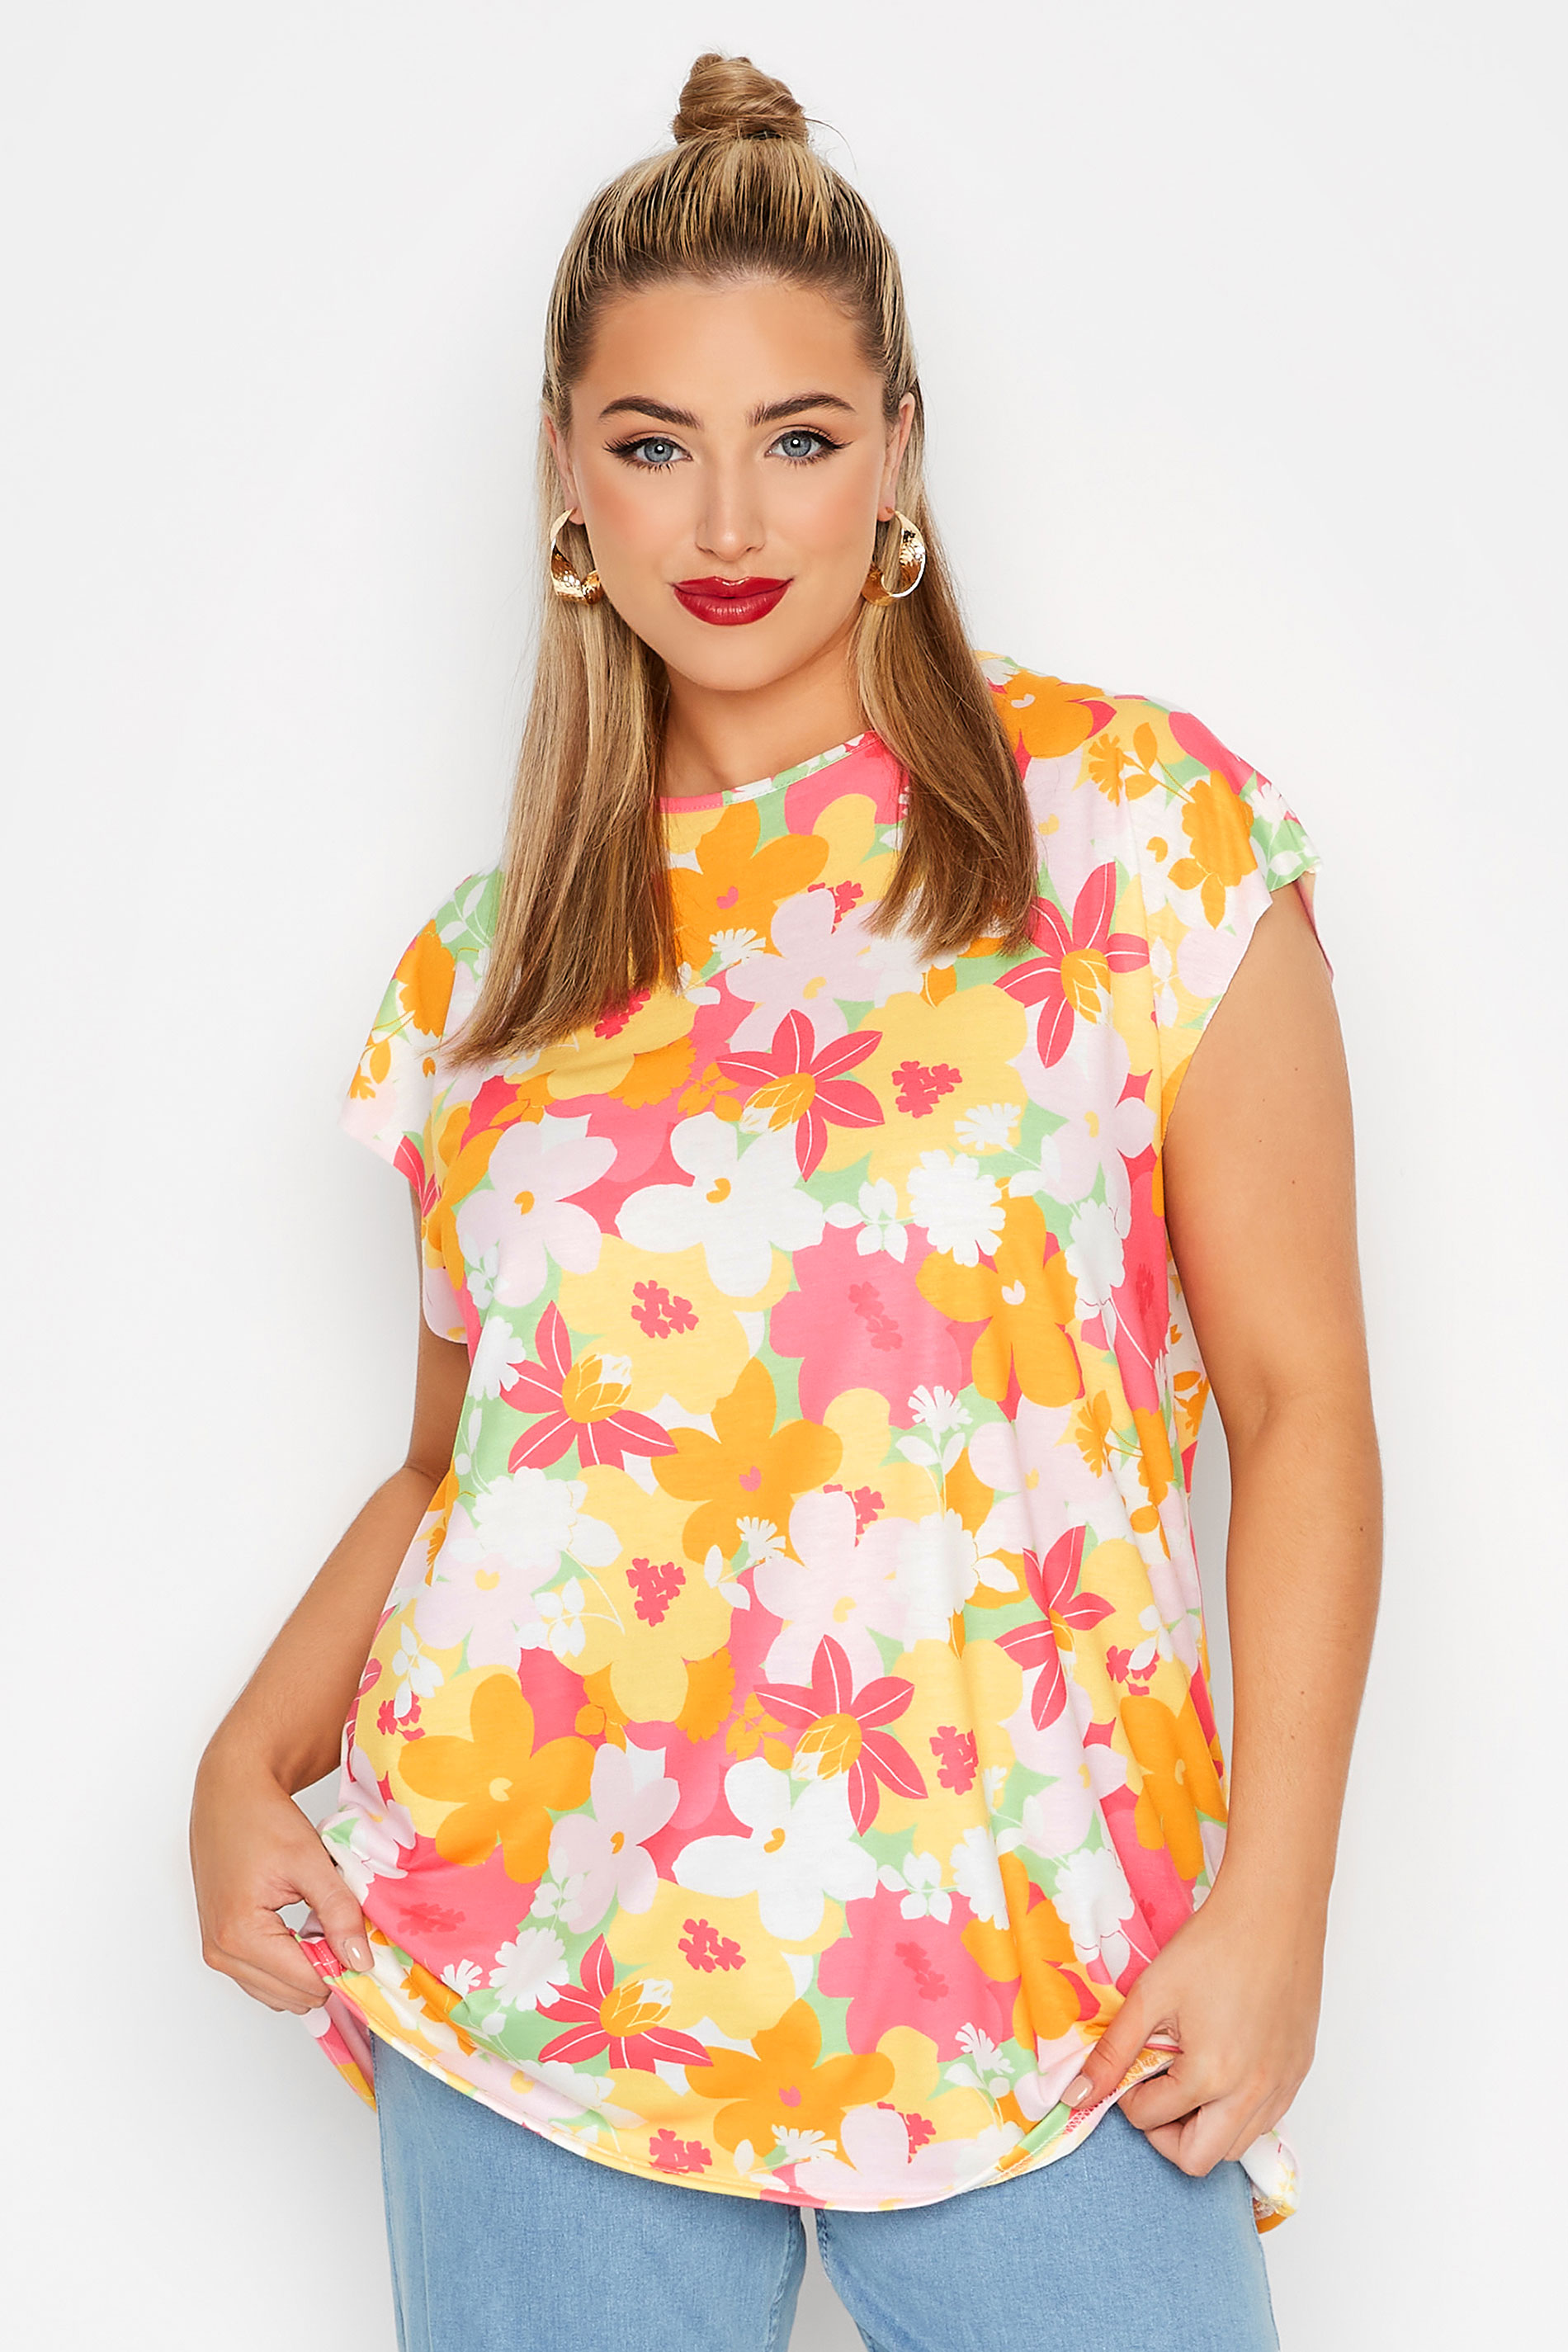 Grande taille  Tops Grande taille  Tops Jersey | LIMITED COLLECTION - T-Shirt Rétro Rose en Floral - PQ10765